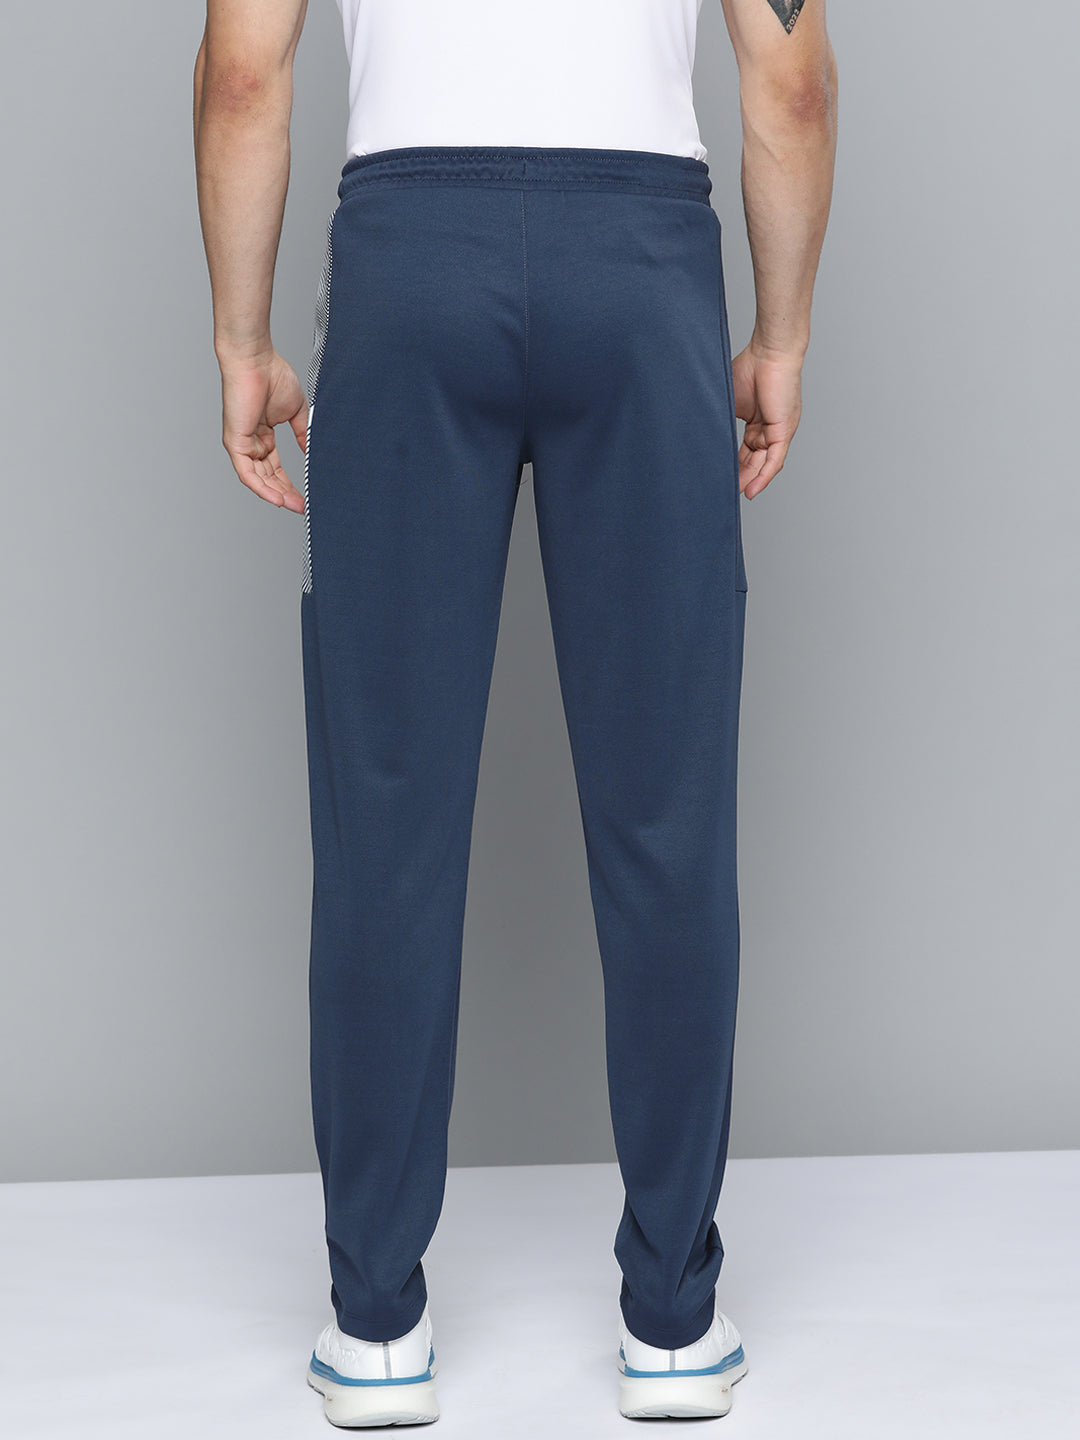 Jeans & Trousers | Brand New Navy Blue Pants For Man | Freeup